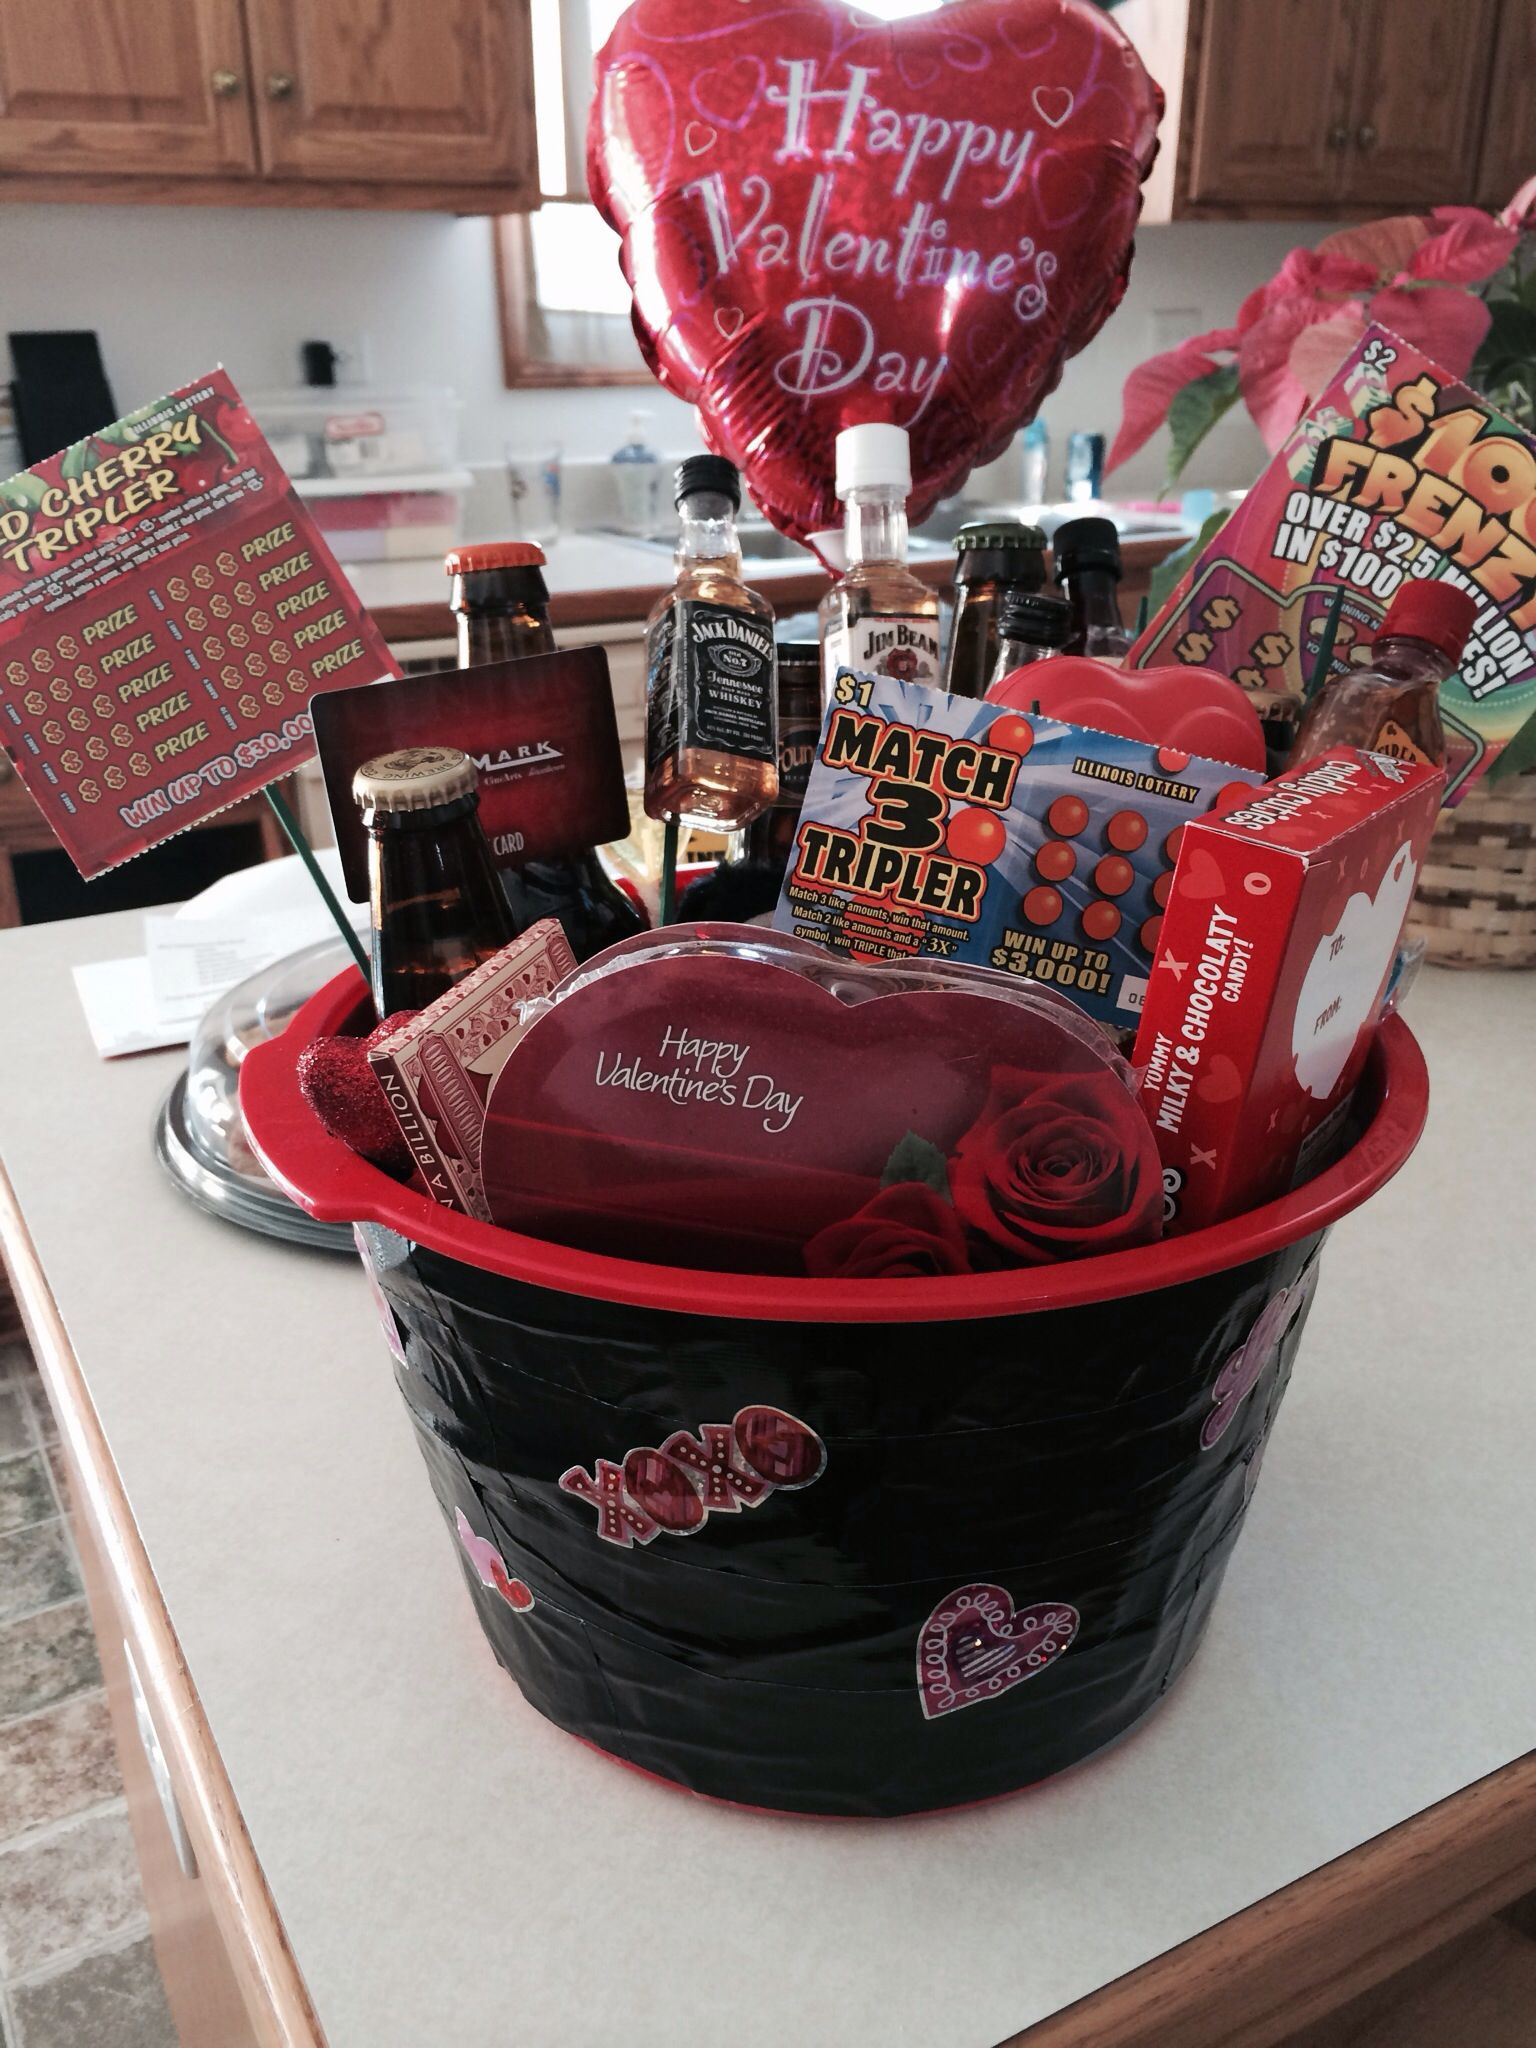 Valentines Day Gift Basket Ideas
 Valentines day basket for him I used 6 IPA beers